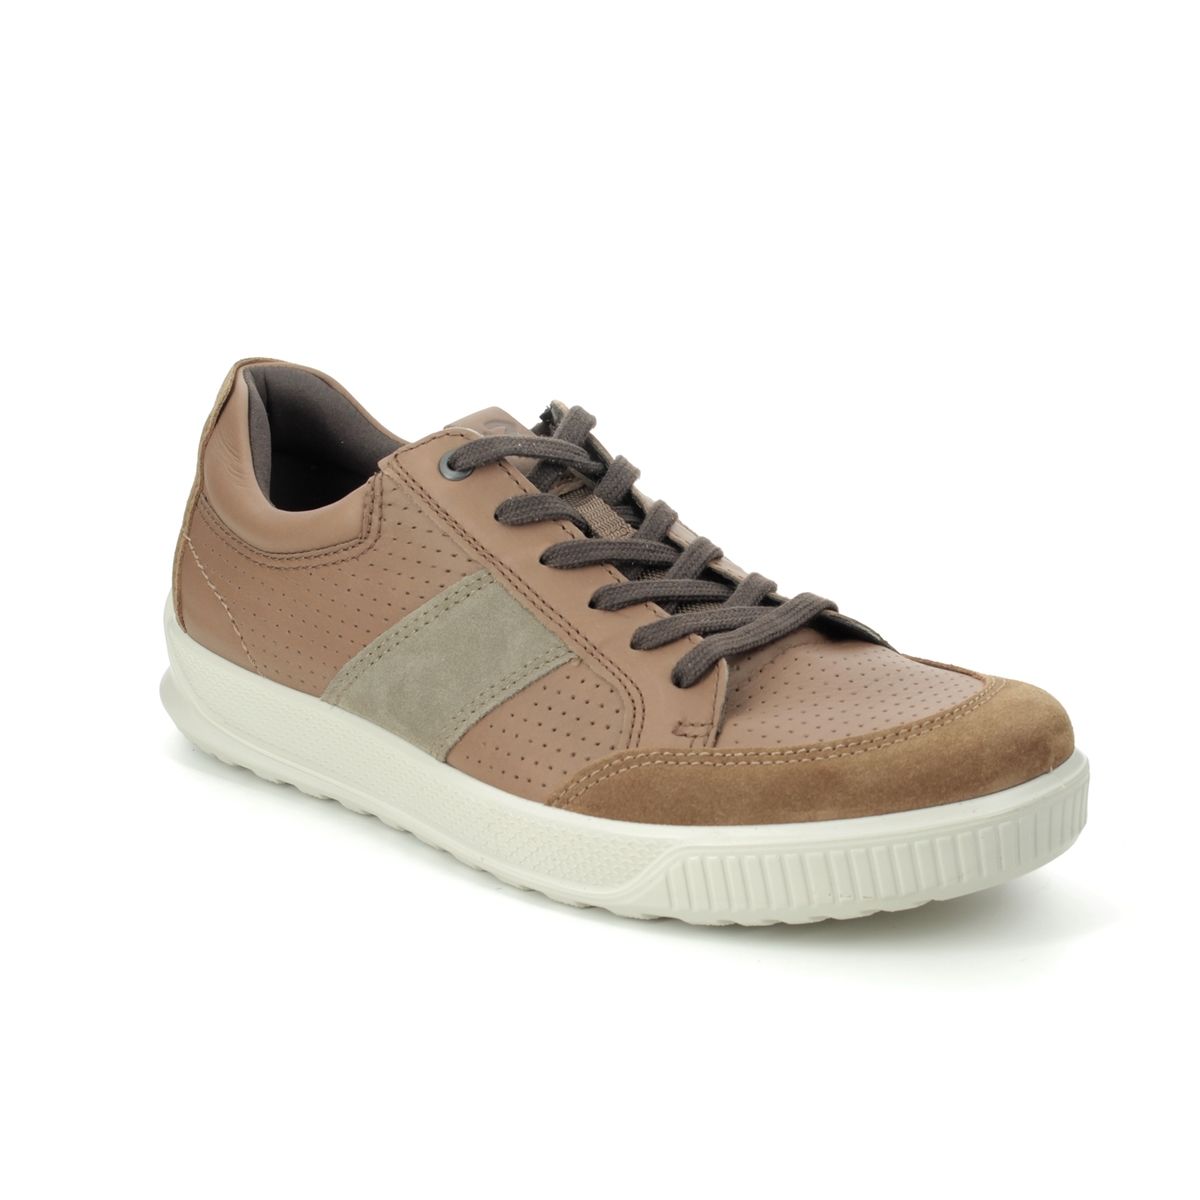 ECCO Byway 501564-51982 Tan Leather comfort shoes